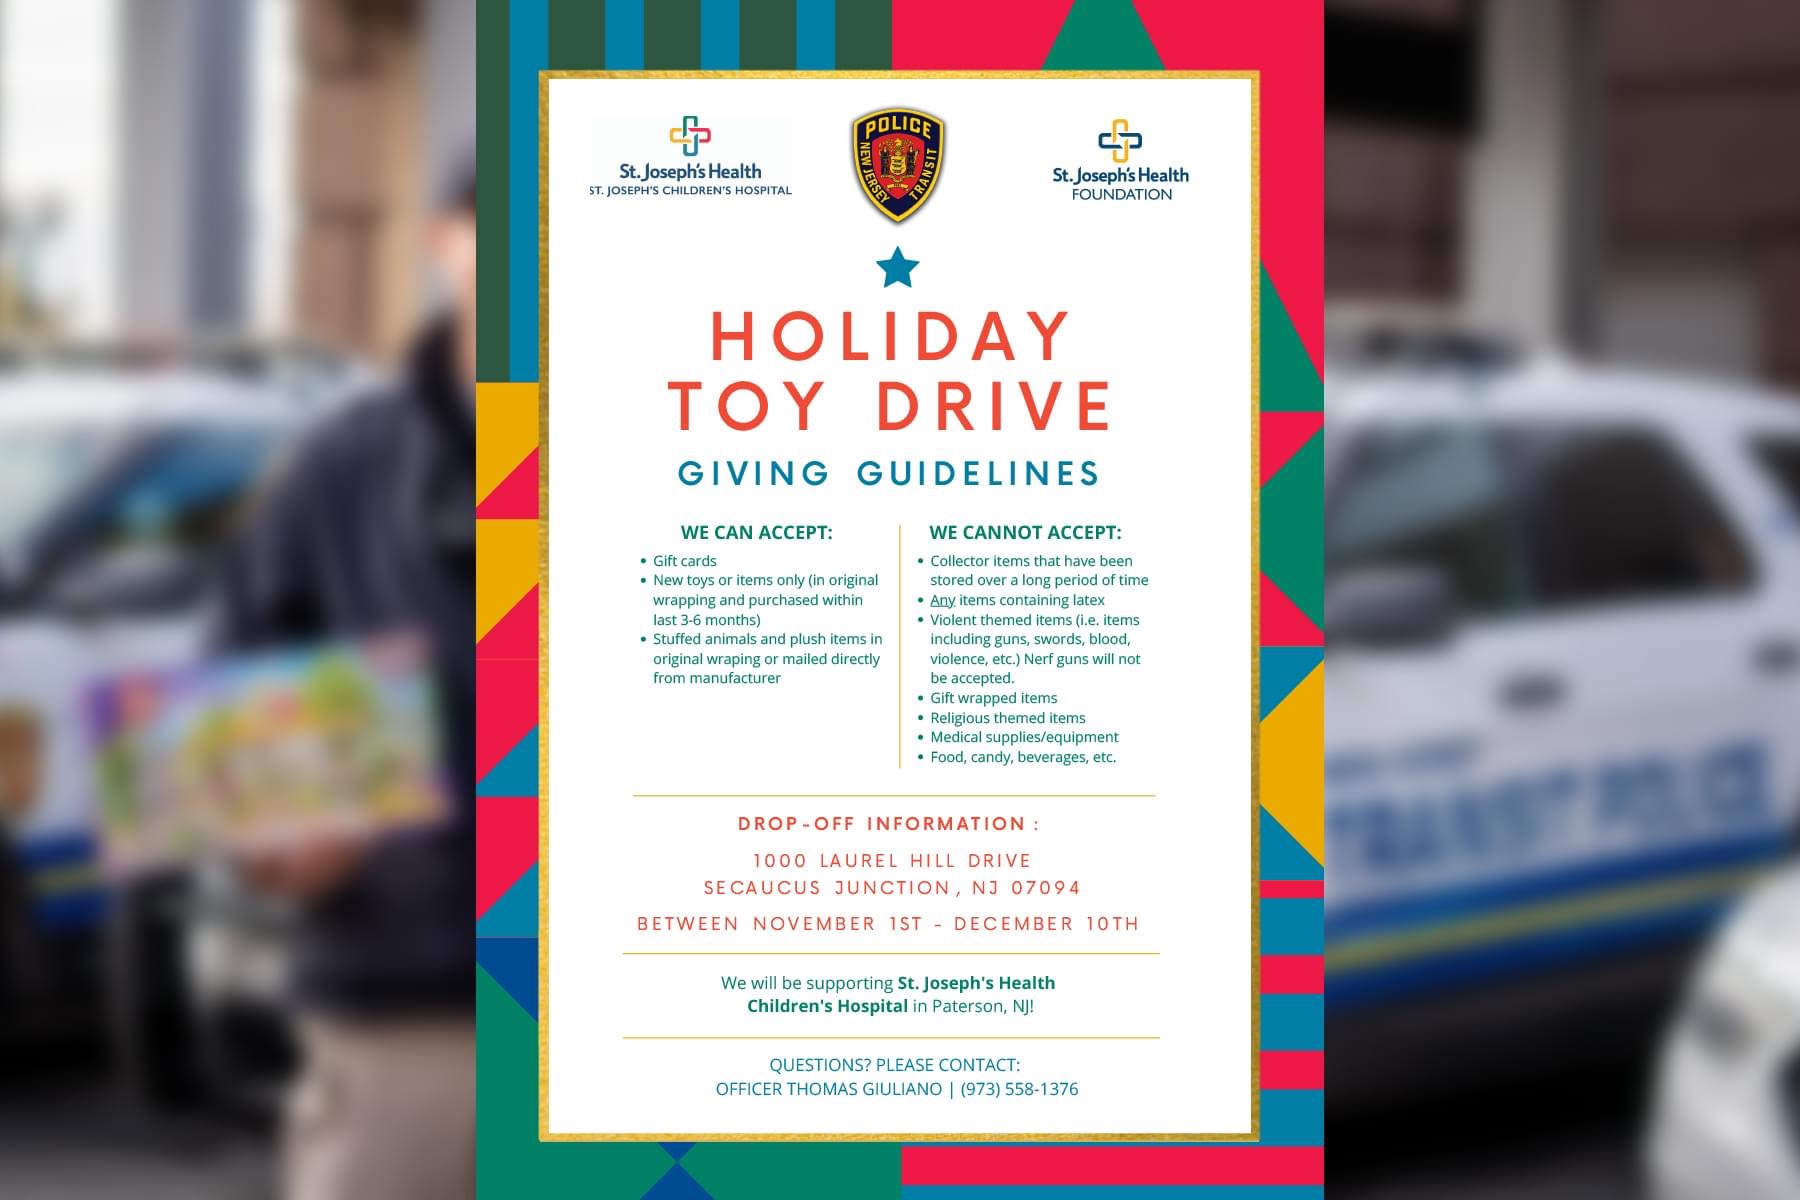 Toy drive 